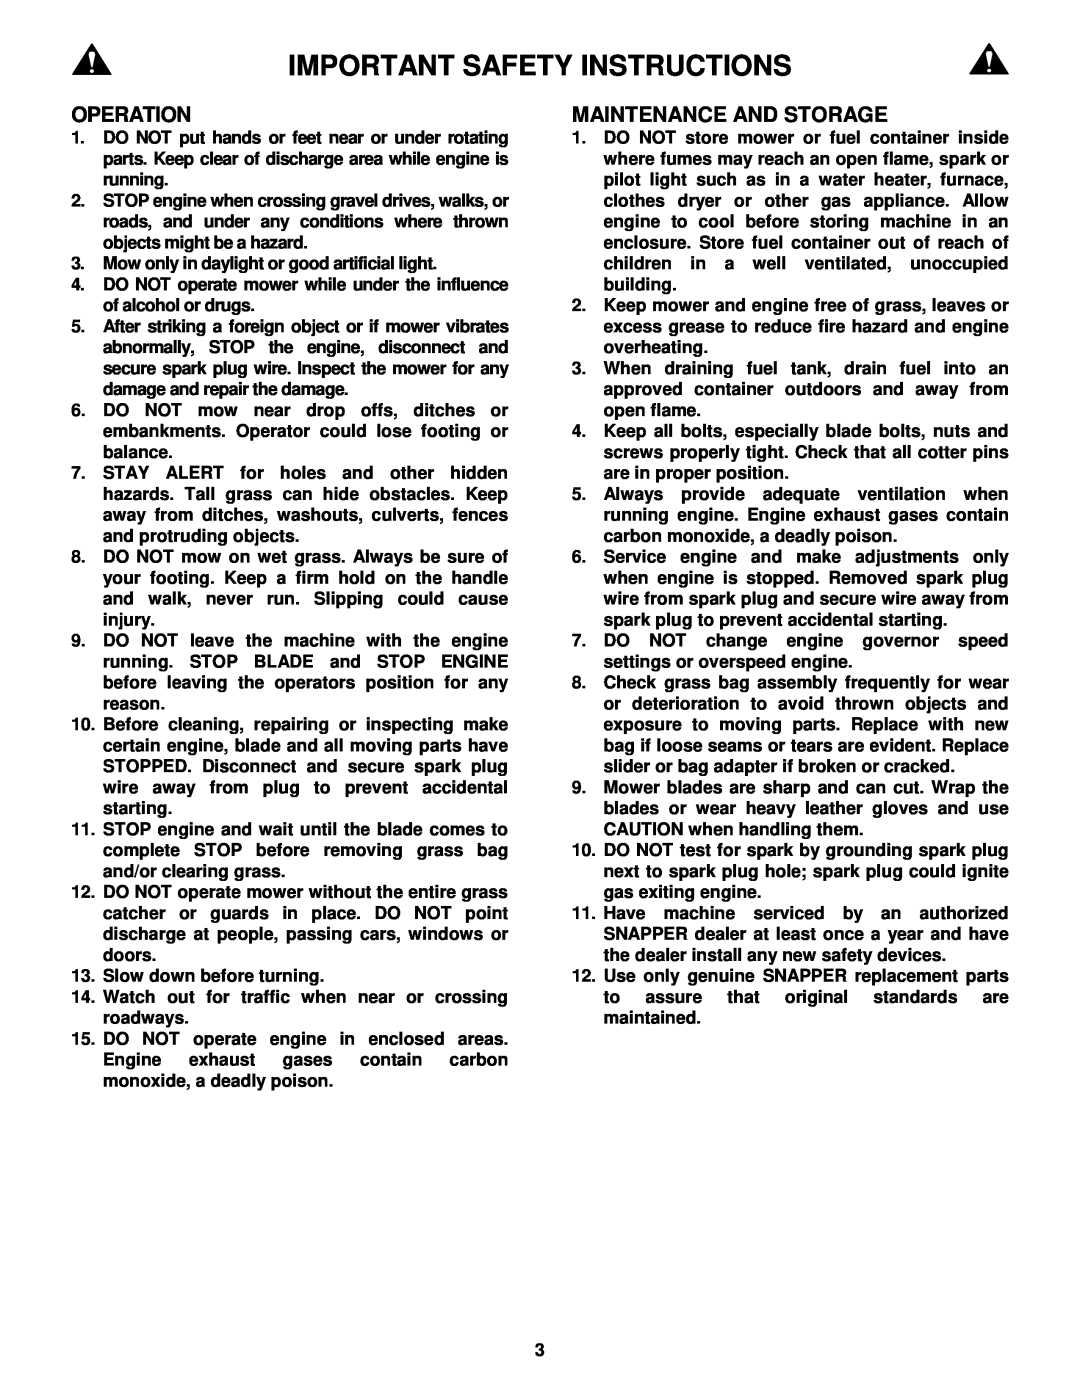 Snapper 215015 important safety instructions Important Safety Instructions, Operation, Maintenance And Storage 